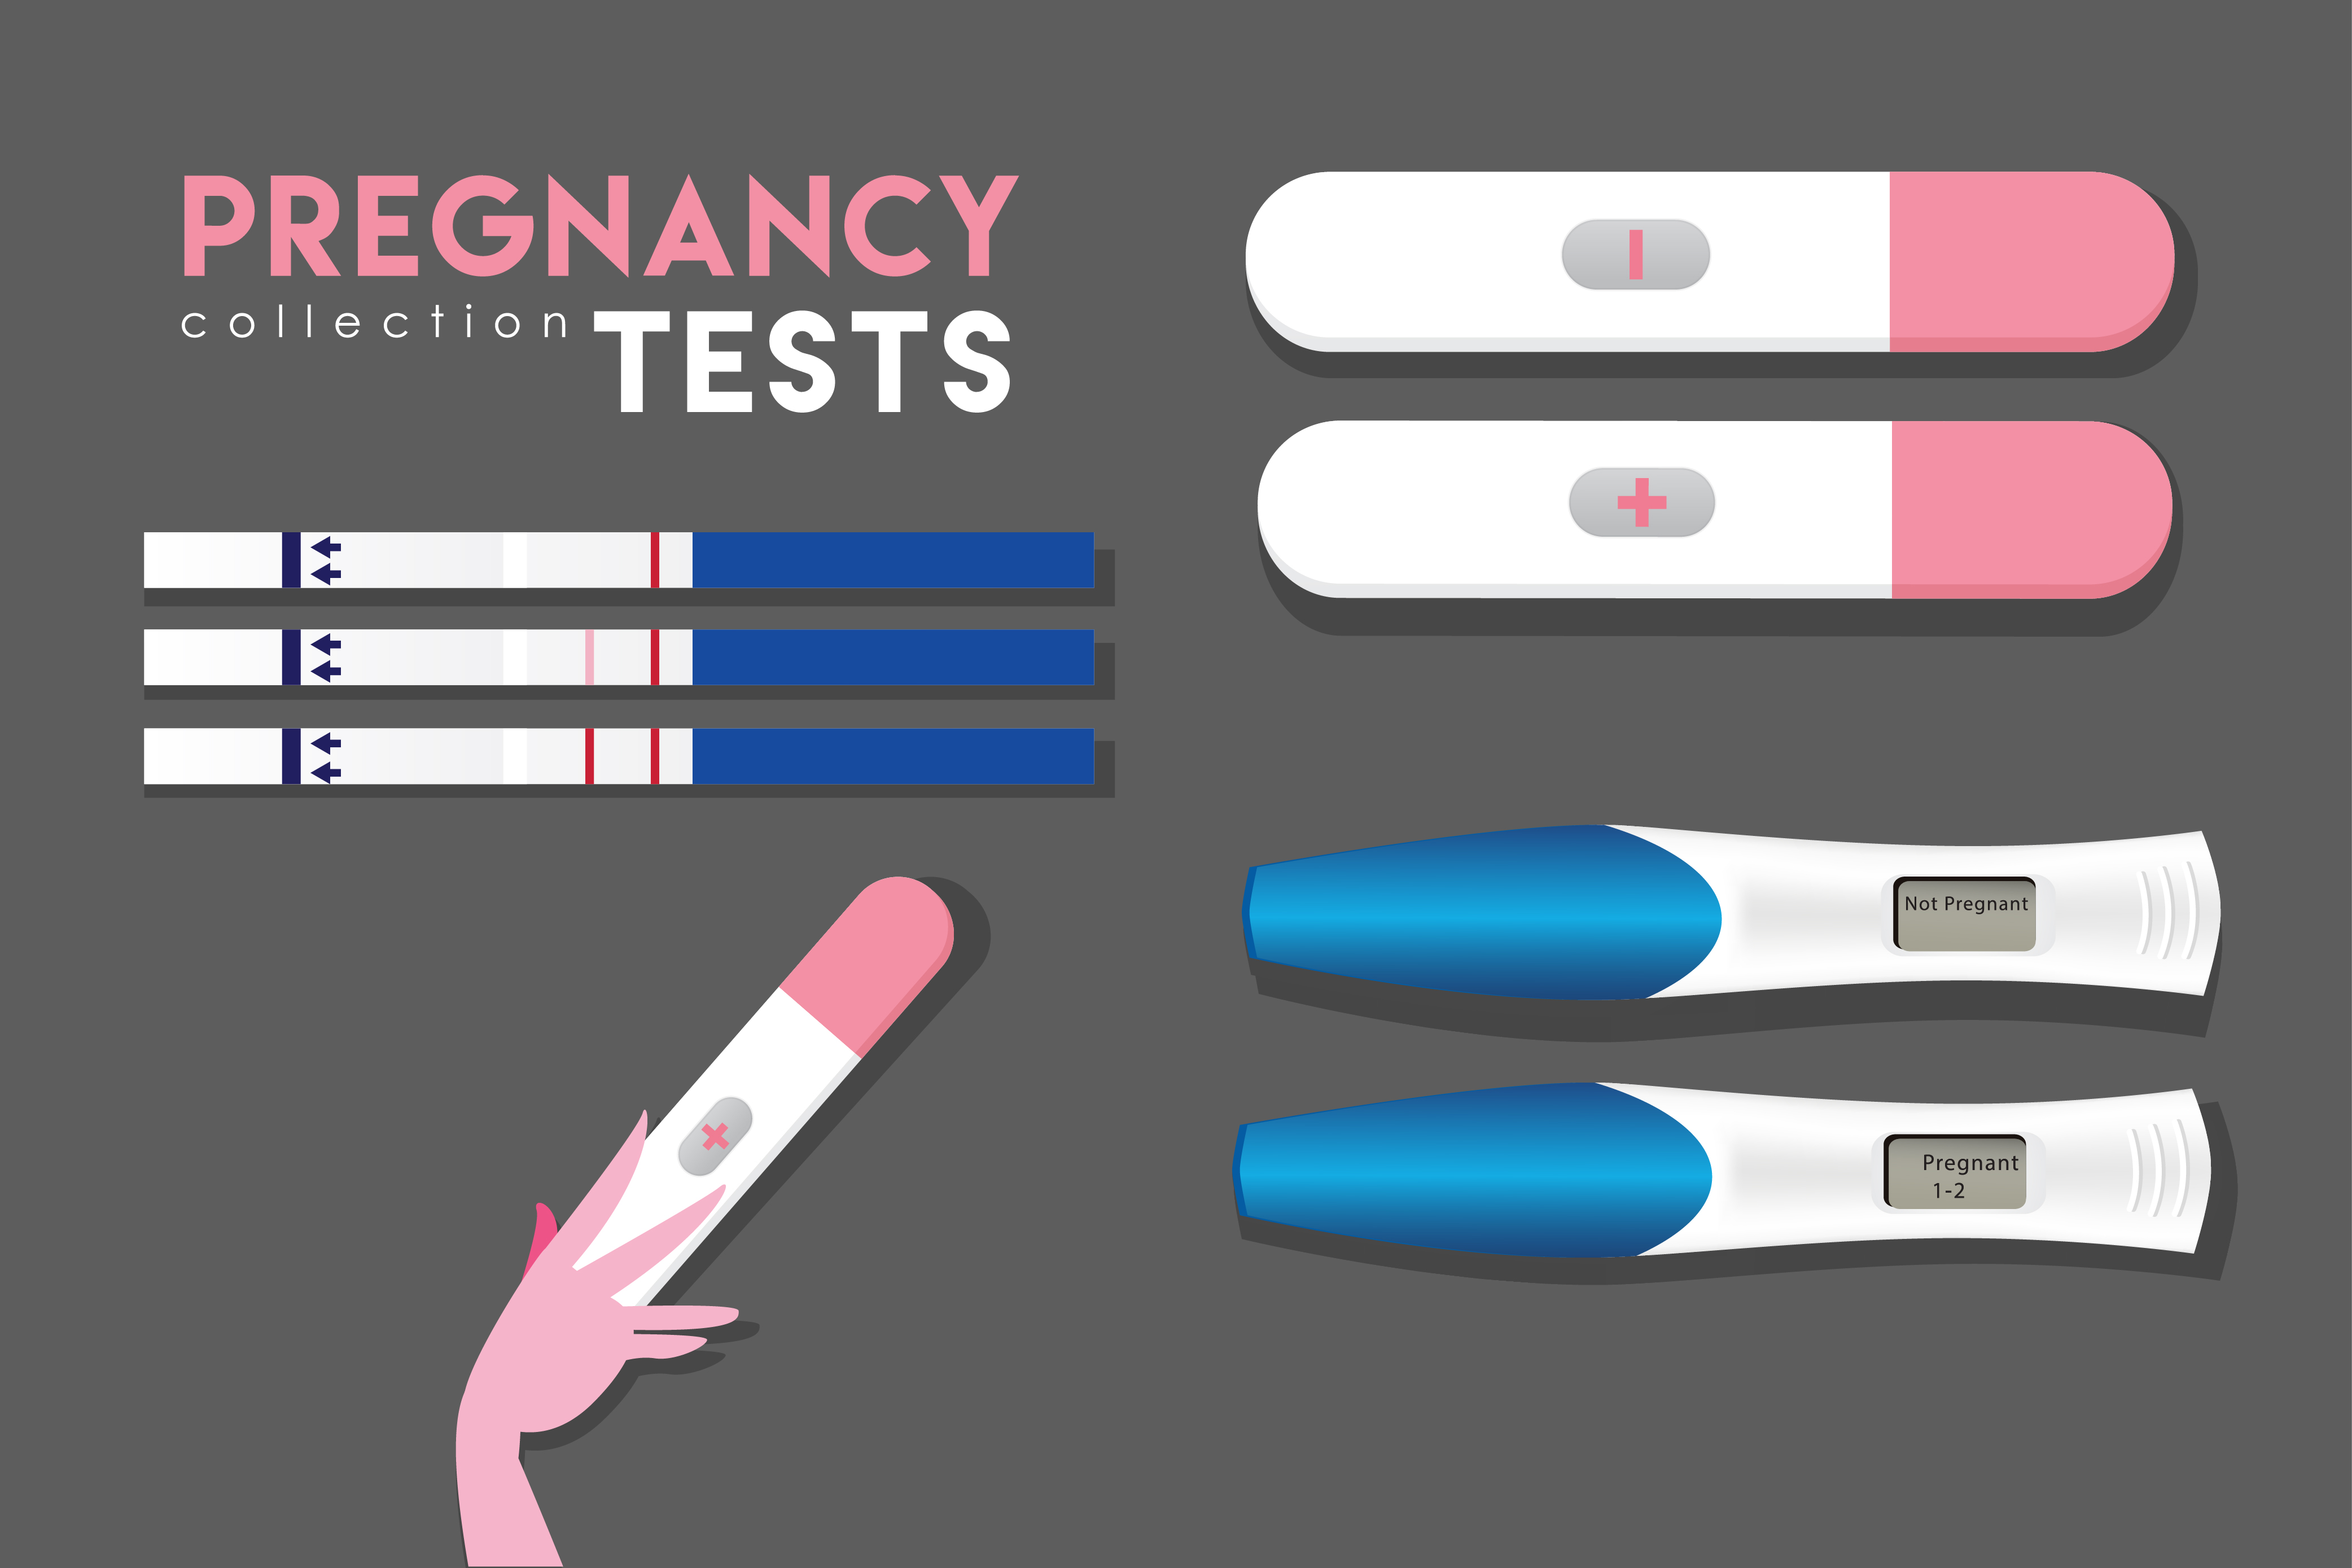 A pregnancy test is used to determine whether a woman is pregnant. 